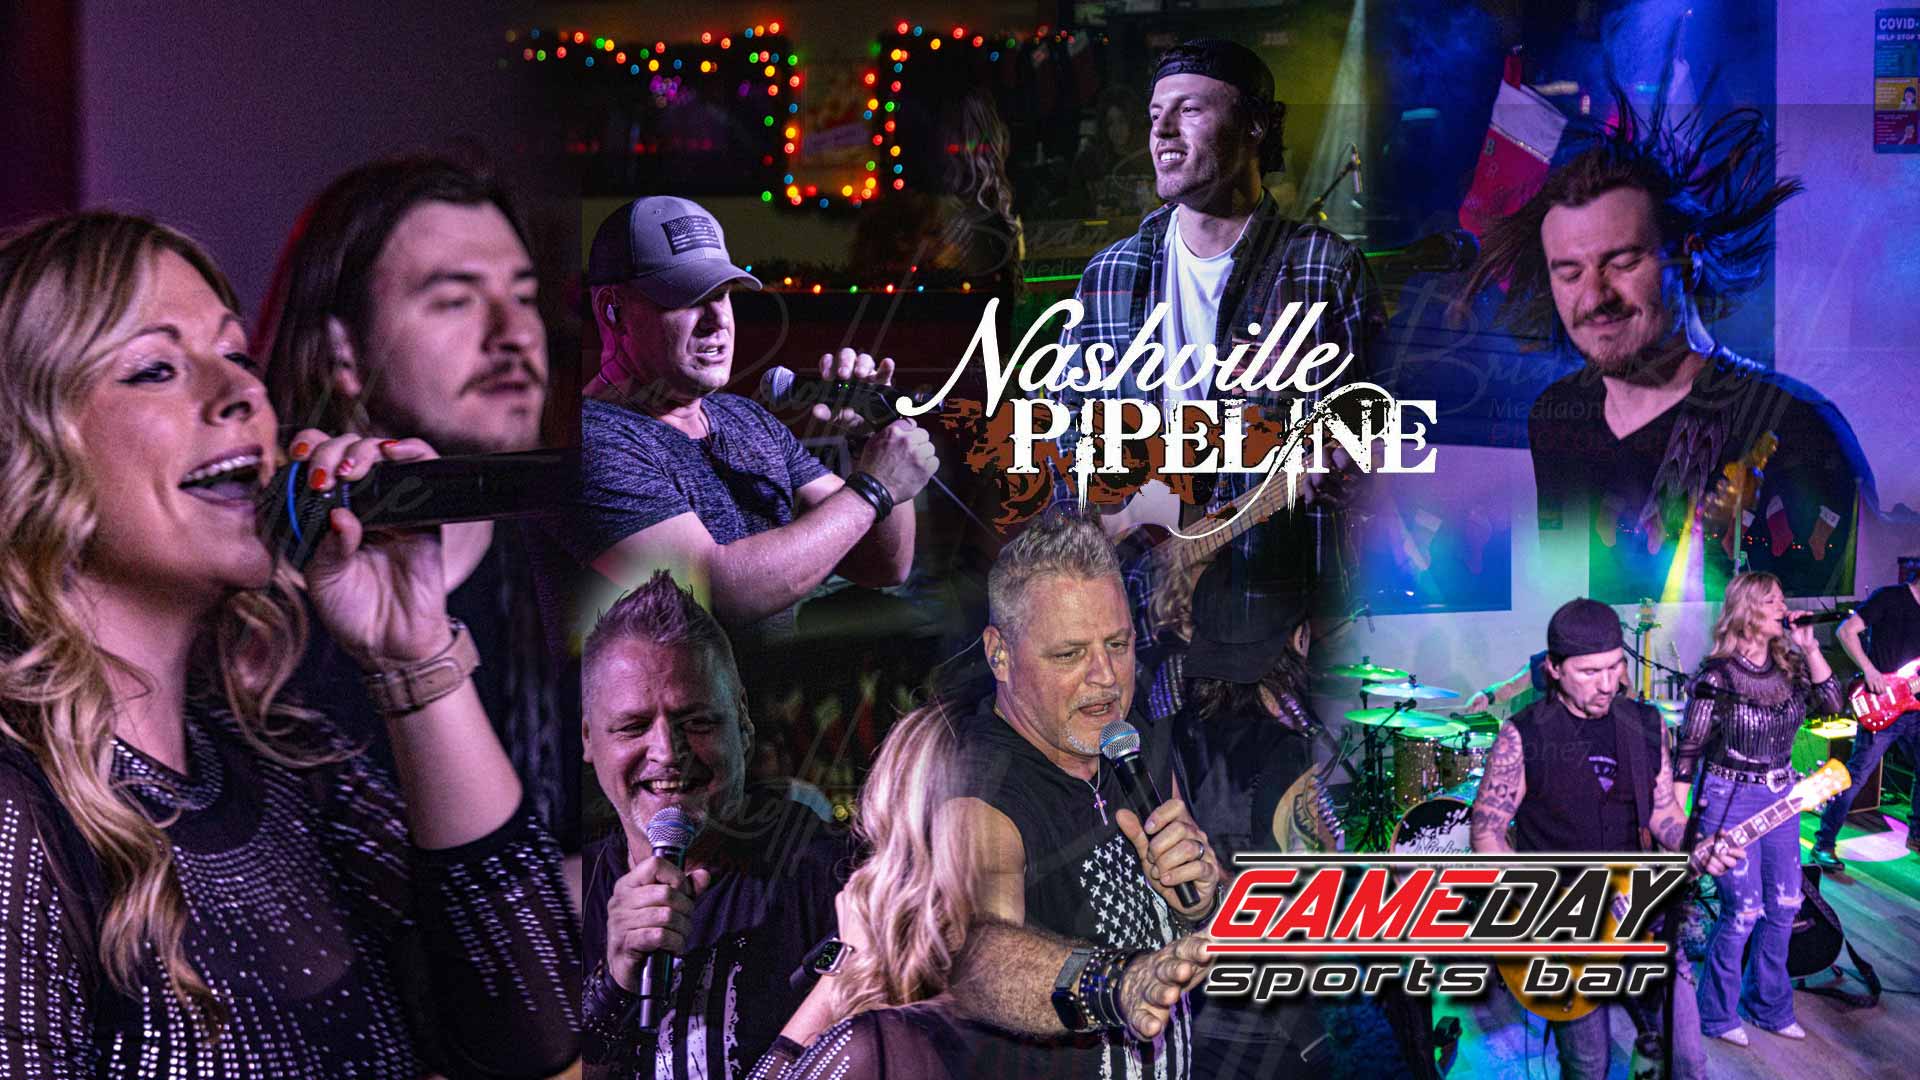 Nashville Pipeline at Gameday Sports Bar for New Years